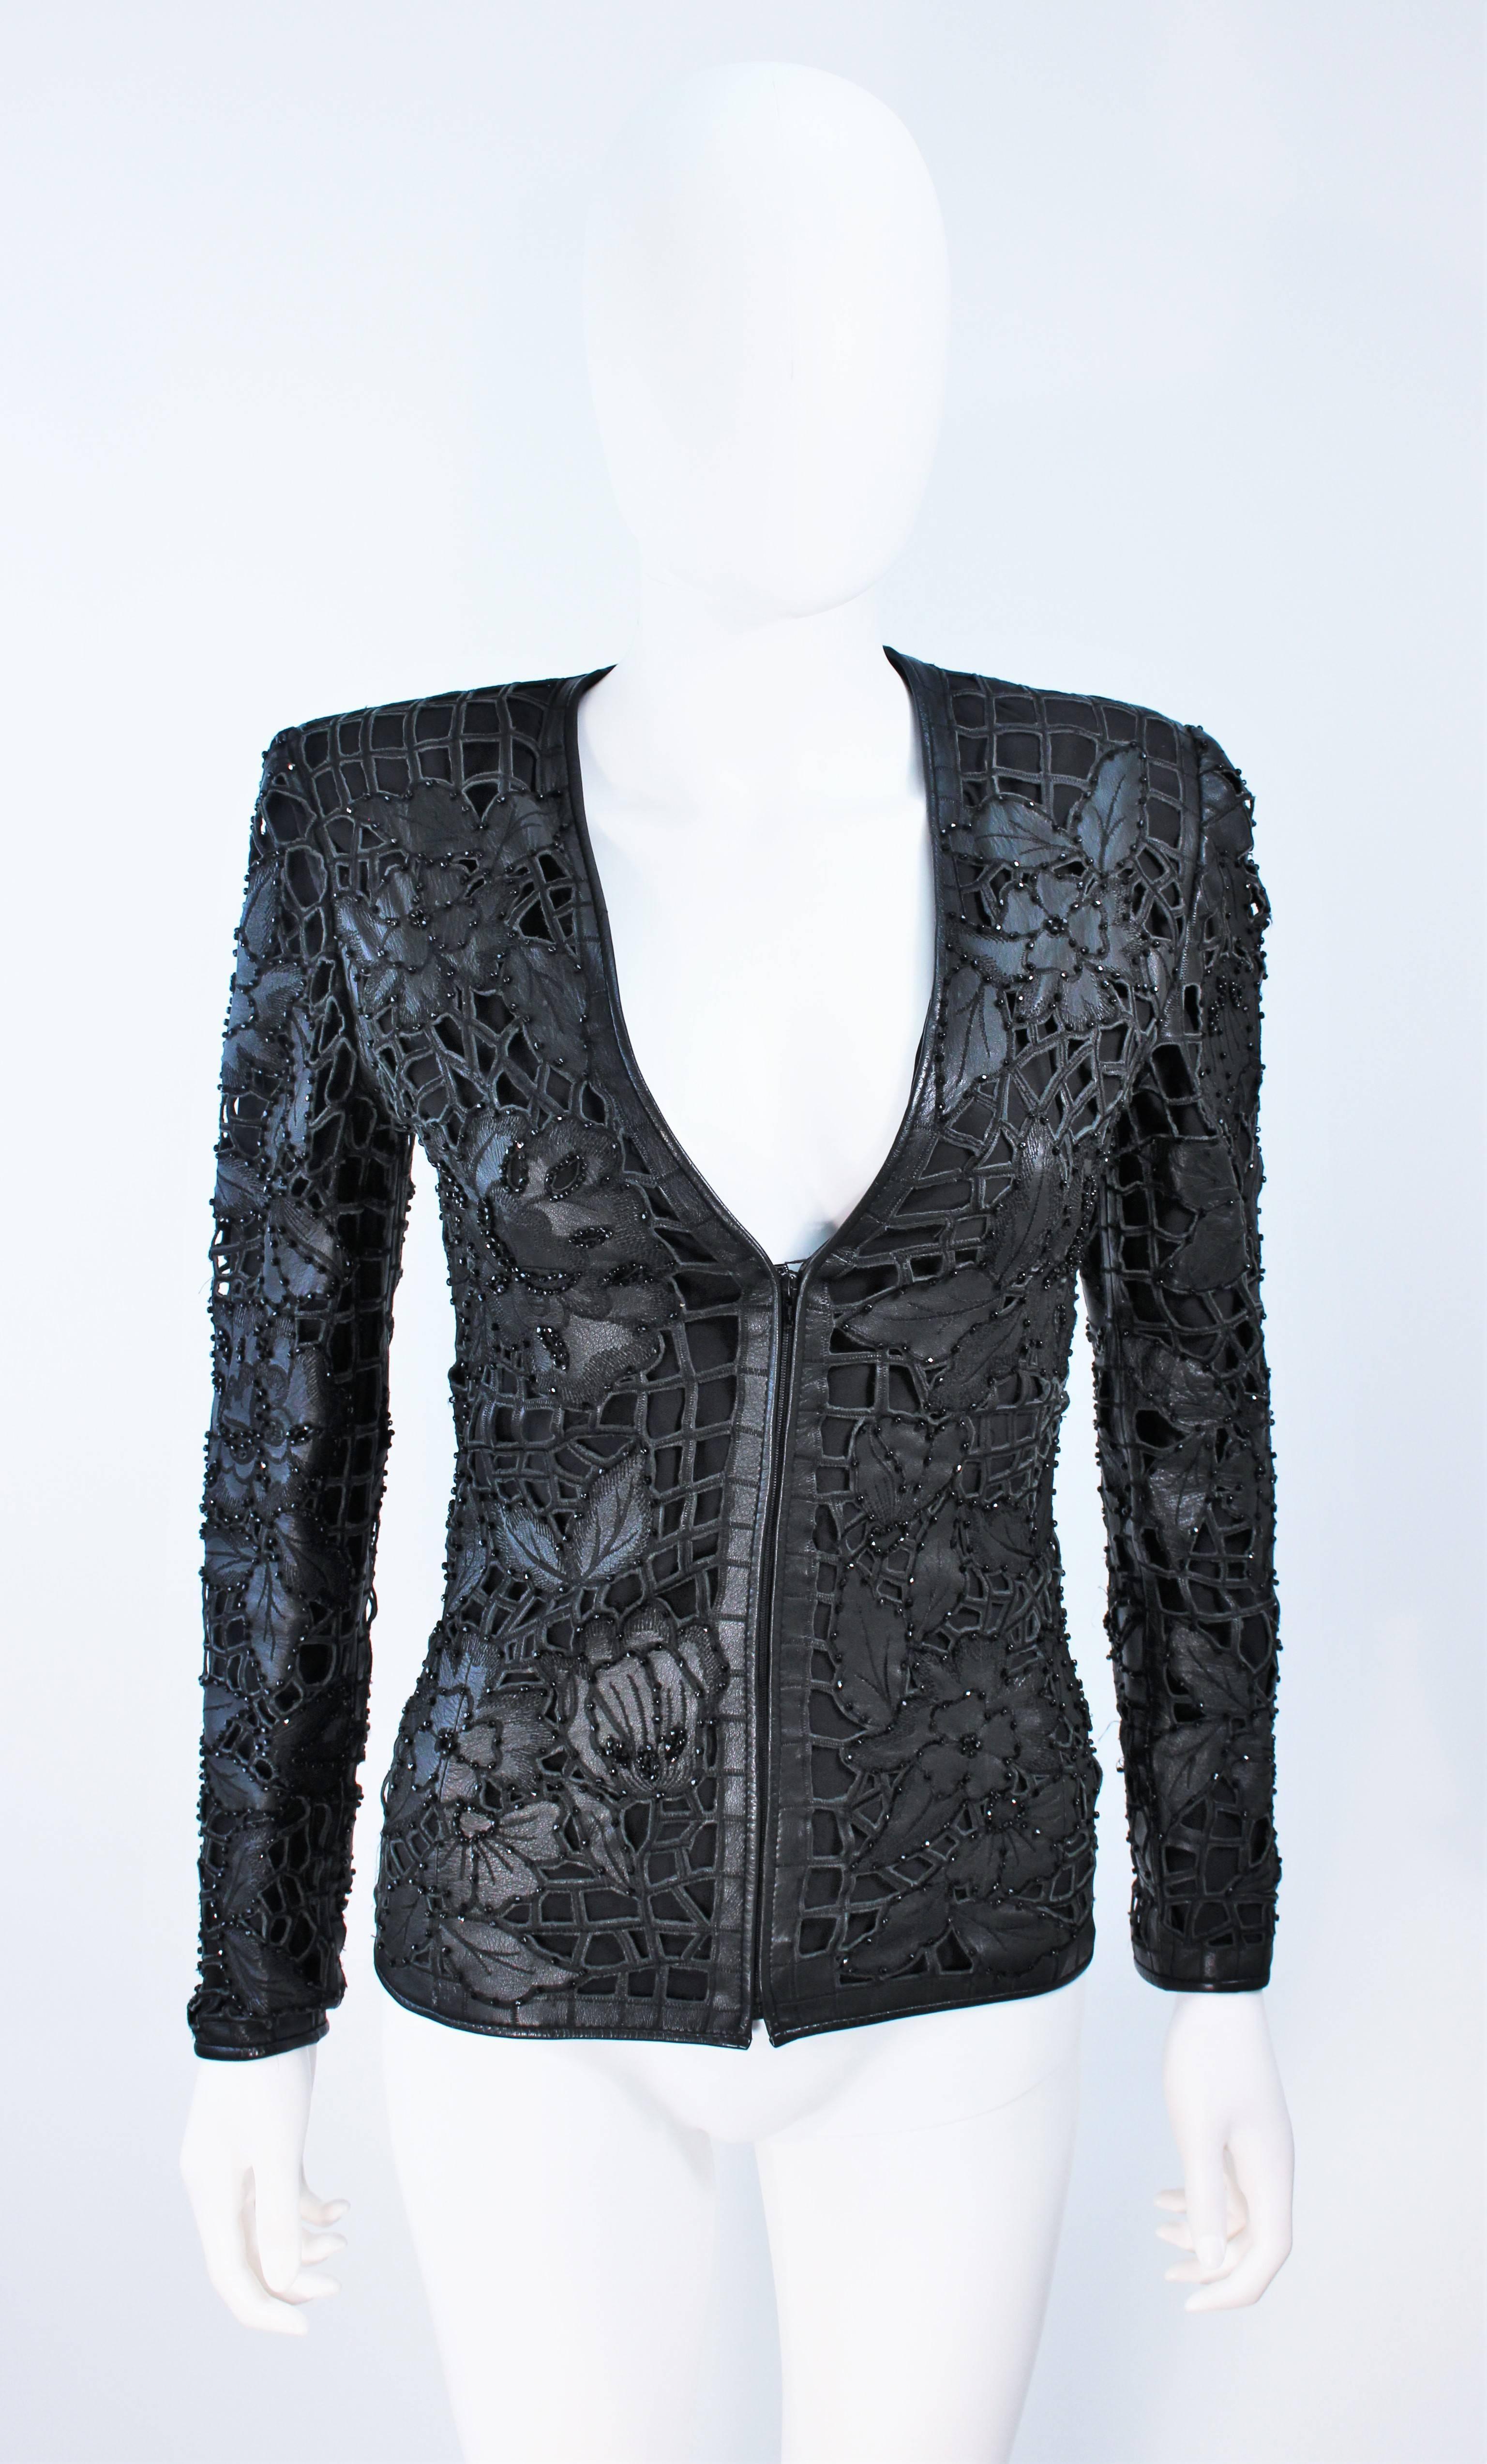  This Valentino jacket is composed of a cut out leather with floral pattern and black faceted bead applique throughout. There is a center front zipper closure. 
In excellent vintage condition. 

  **Please cross-reference measurements for personal